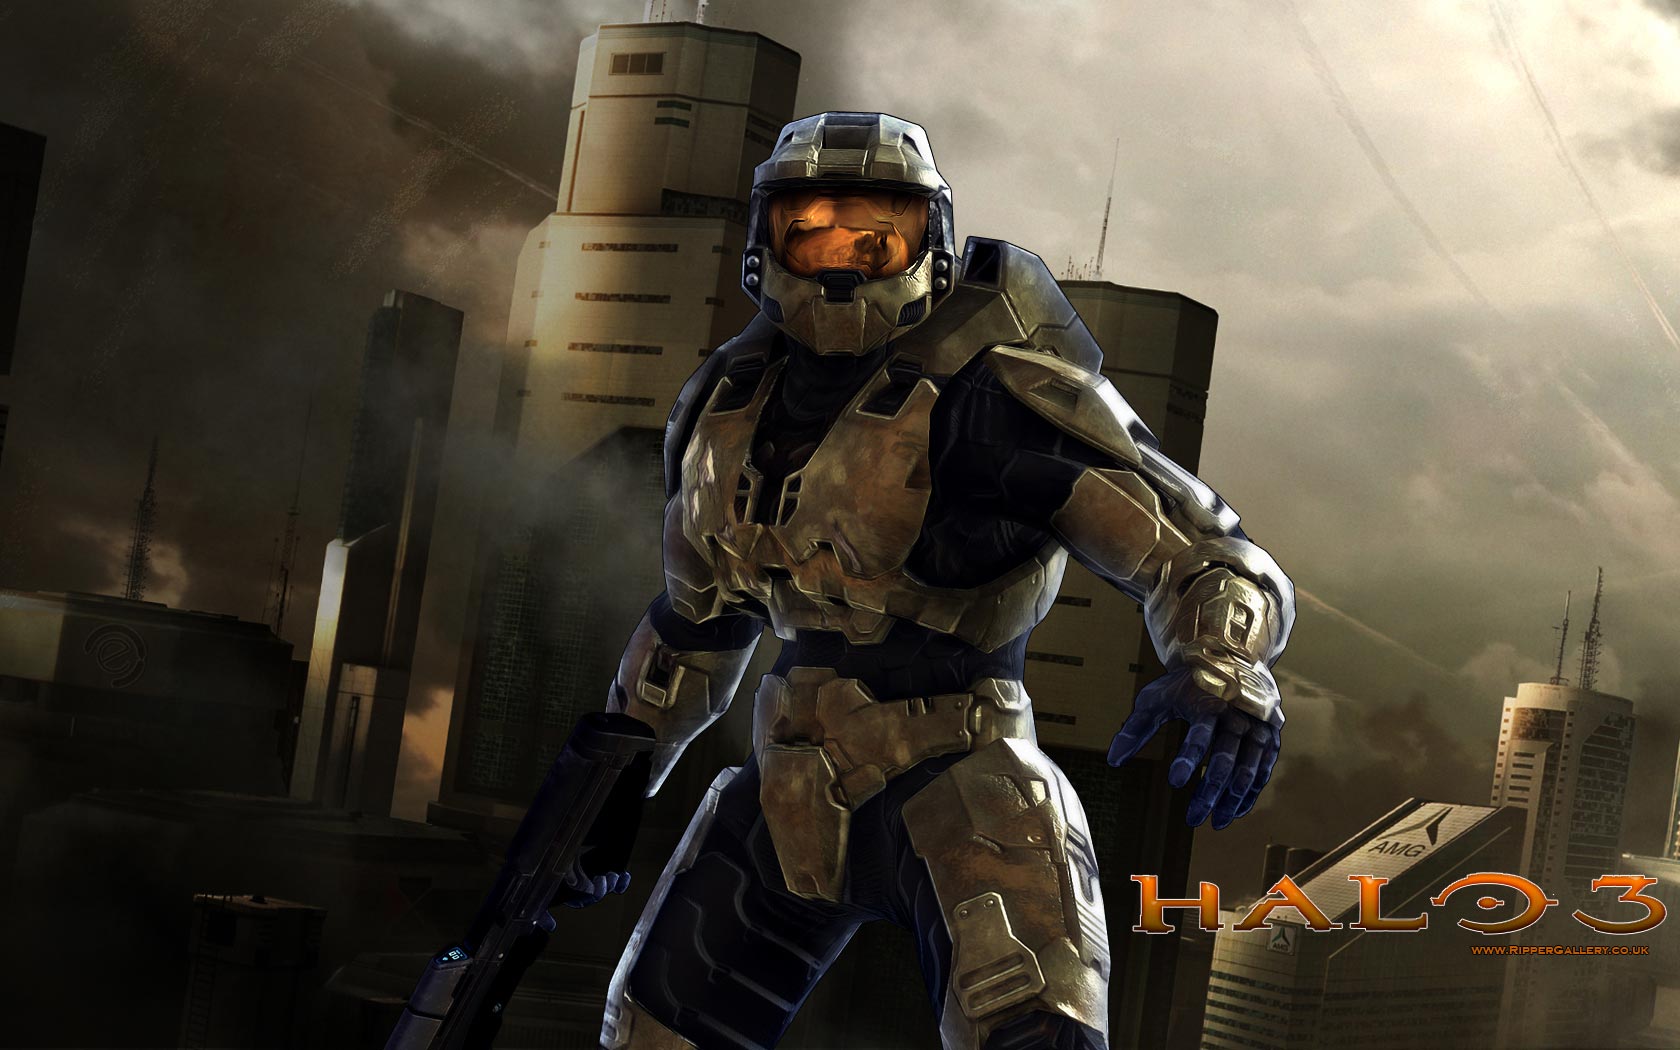 HD Wallpaper Games Halo Series Video Game High